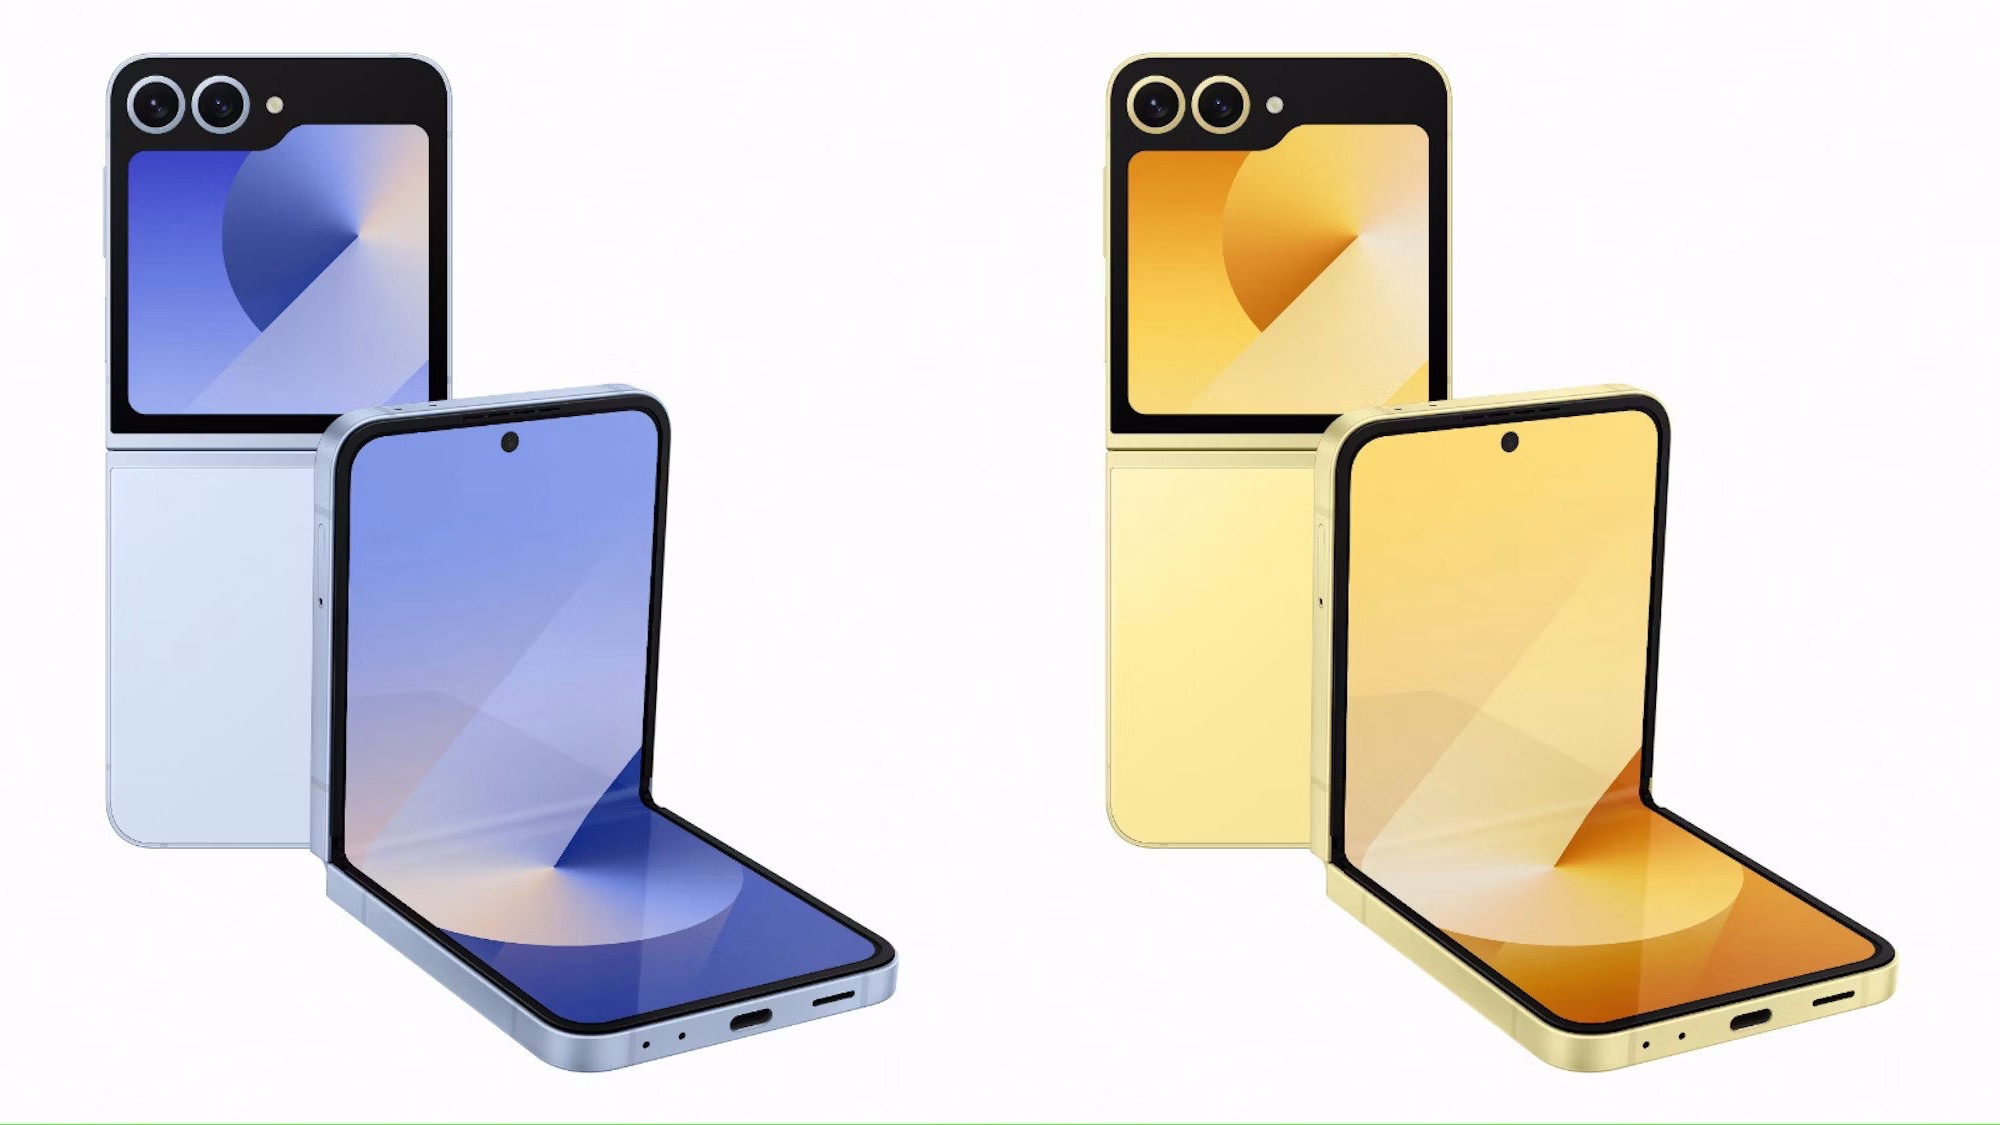 Galaxy Z Flip 6 in blue and yellow